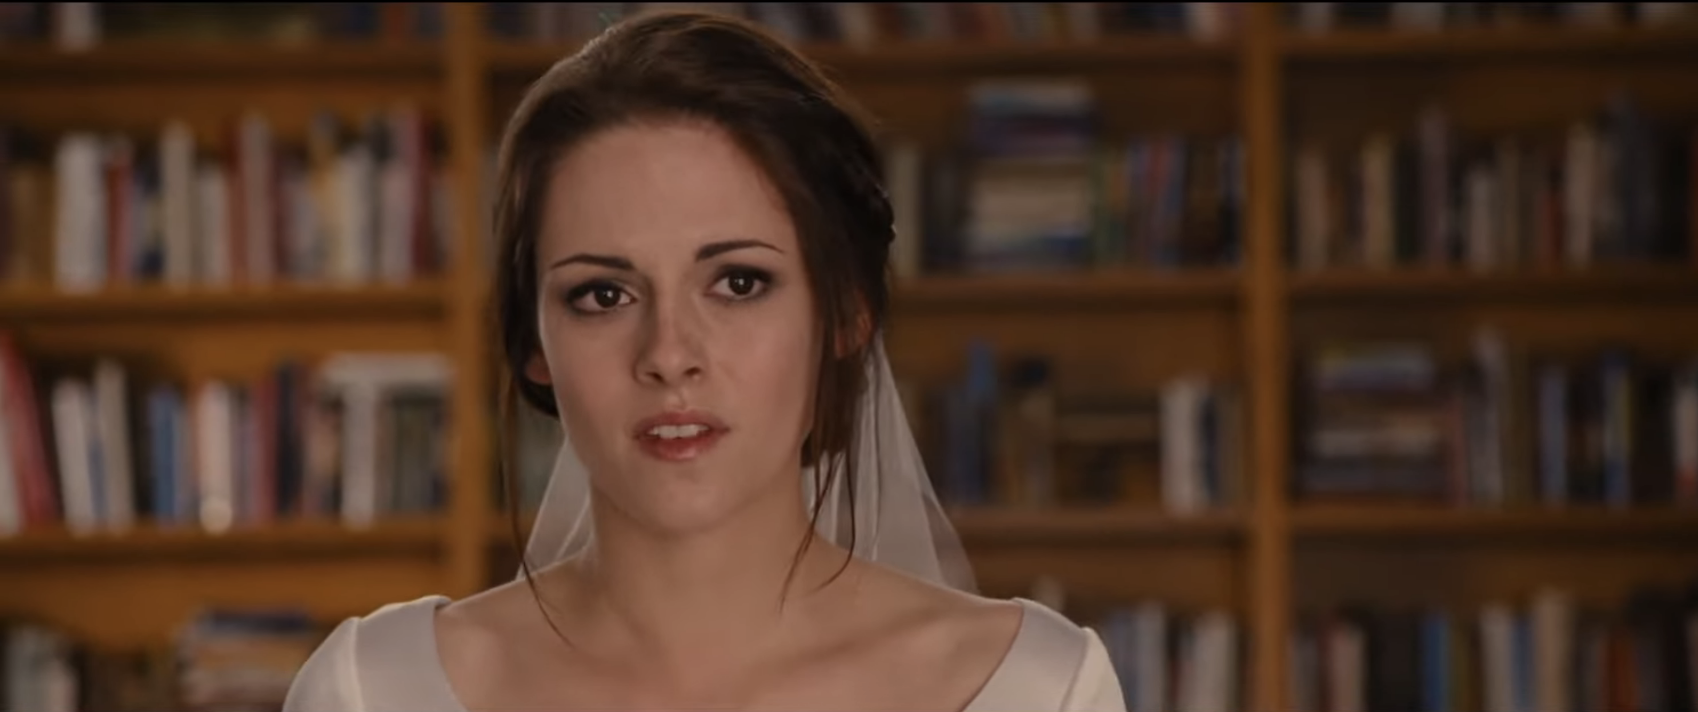 Bella Swan in a simple wedding dress with a sheer veil, standing in a room with bookshelves